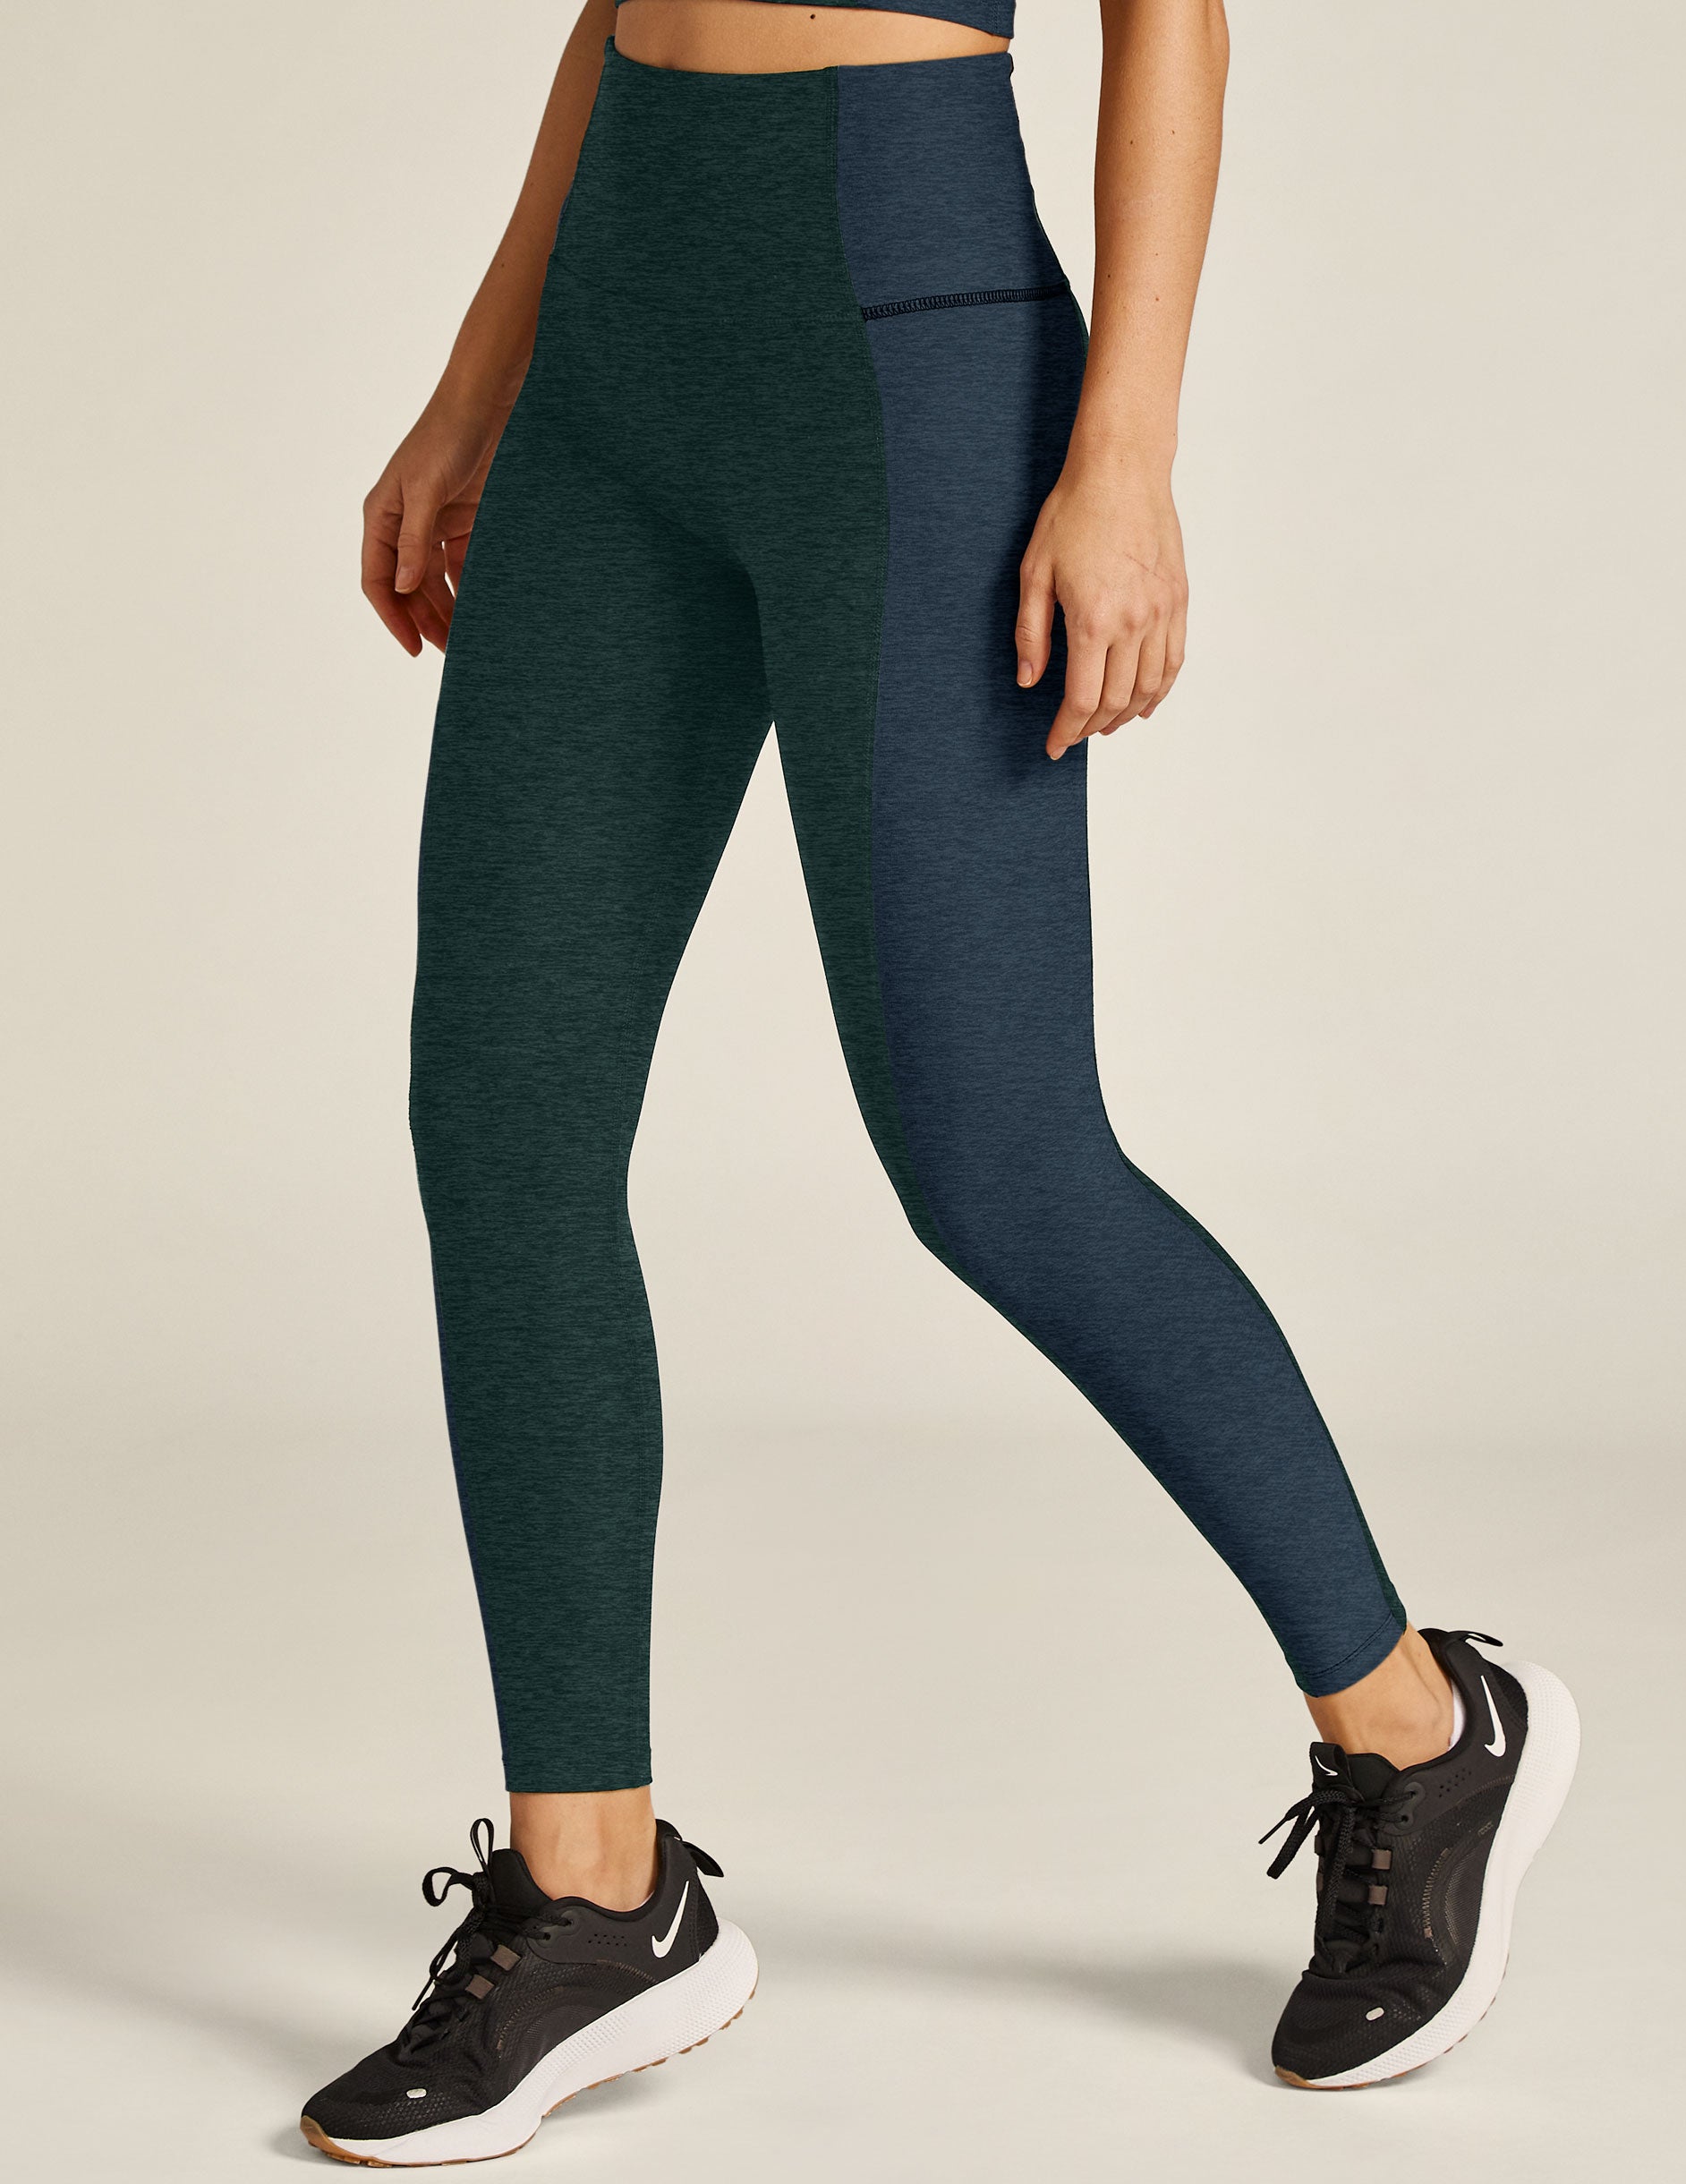 Fortitude activewear stretchy yoga or jogging leggings. Black accents on  sides